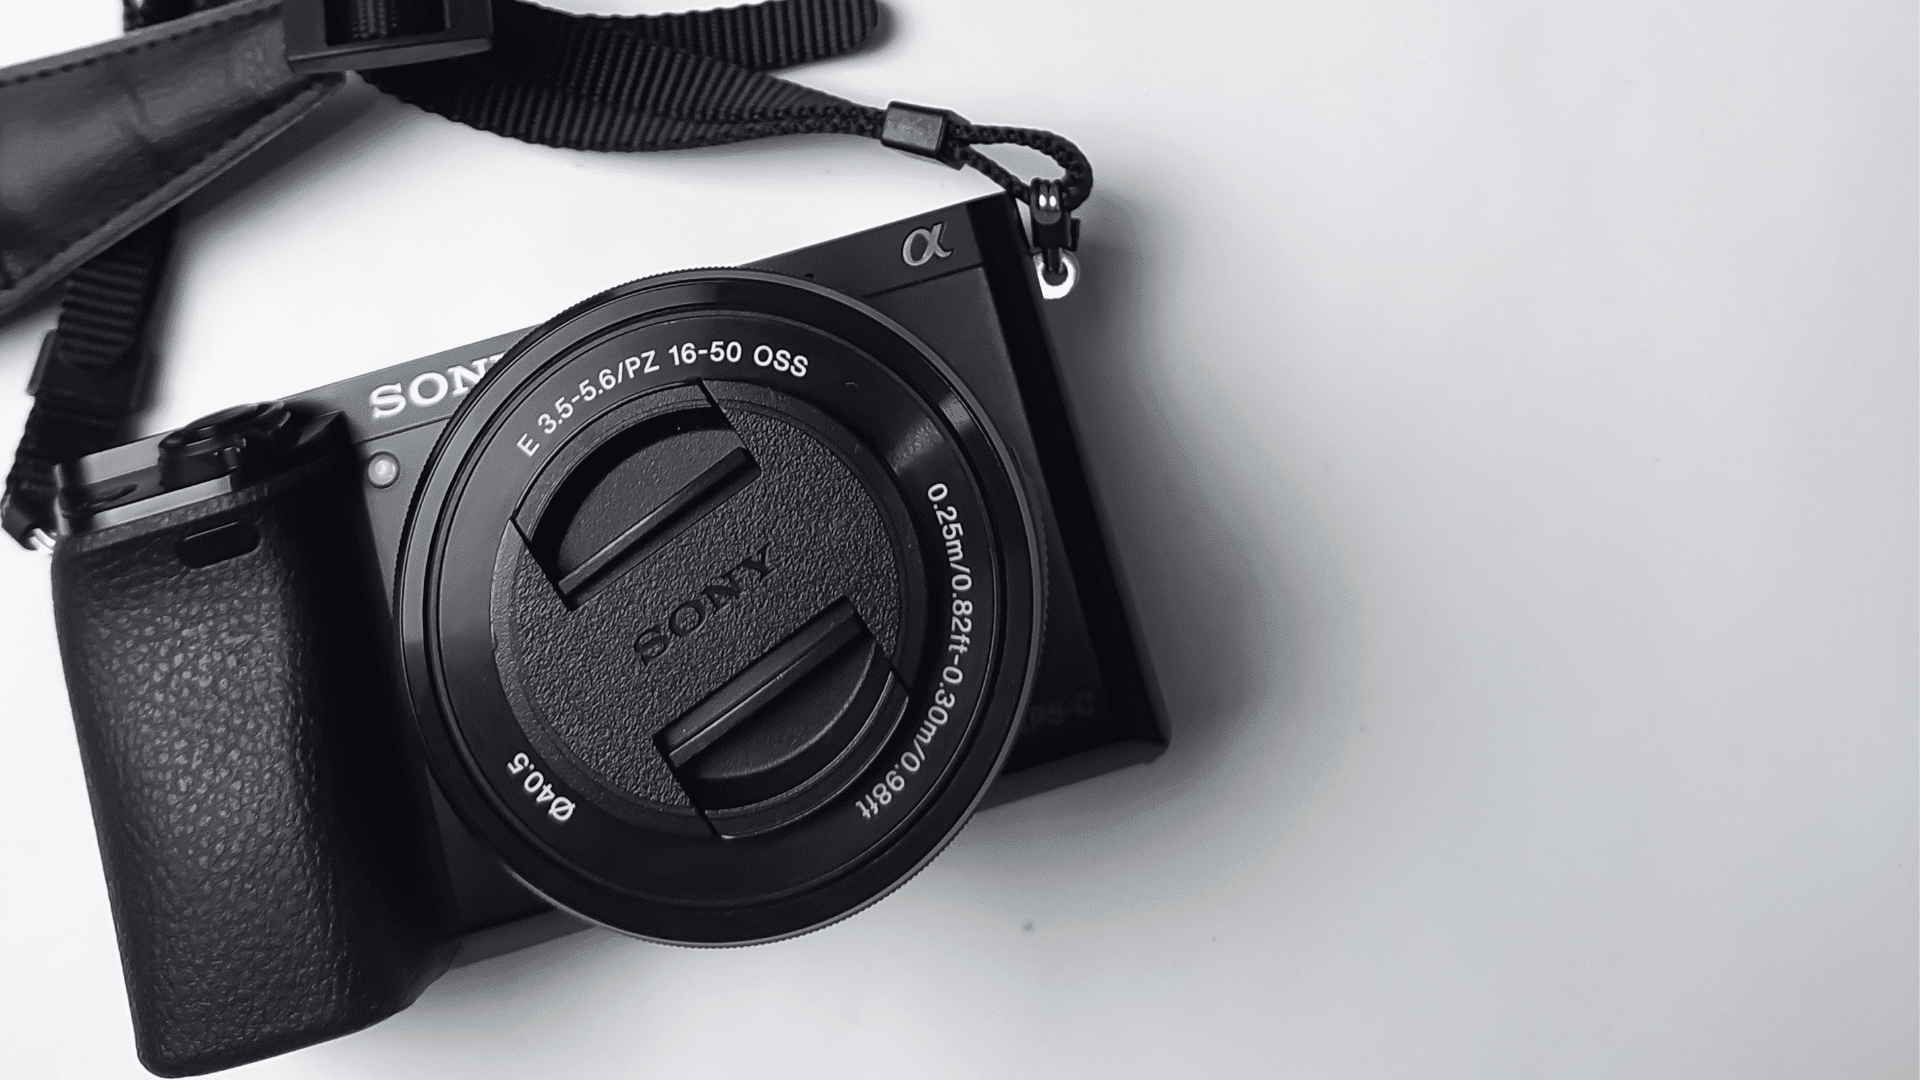 A mirrorless camera with a short battery life